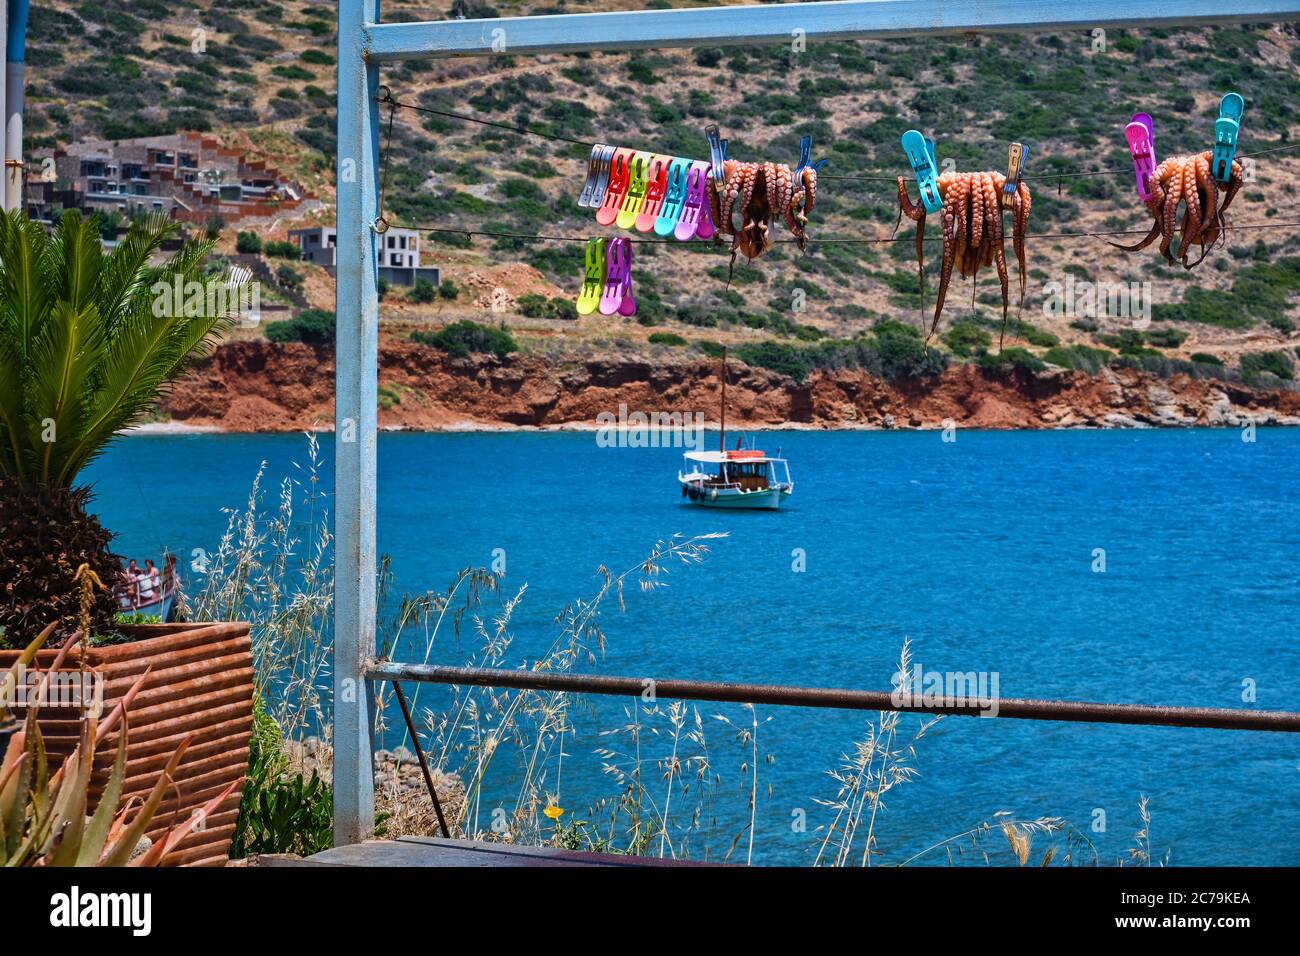 Traditional sun-dried octopuses clipped to rope with typical Greek hills and fishermen's boat in background, Crete, Greece Stock Photo